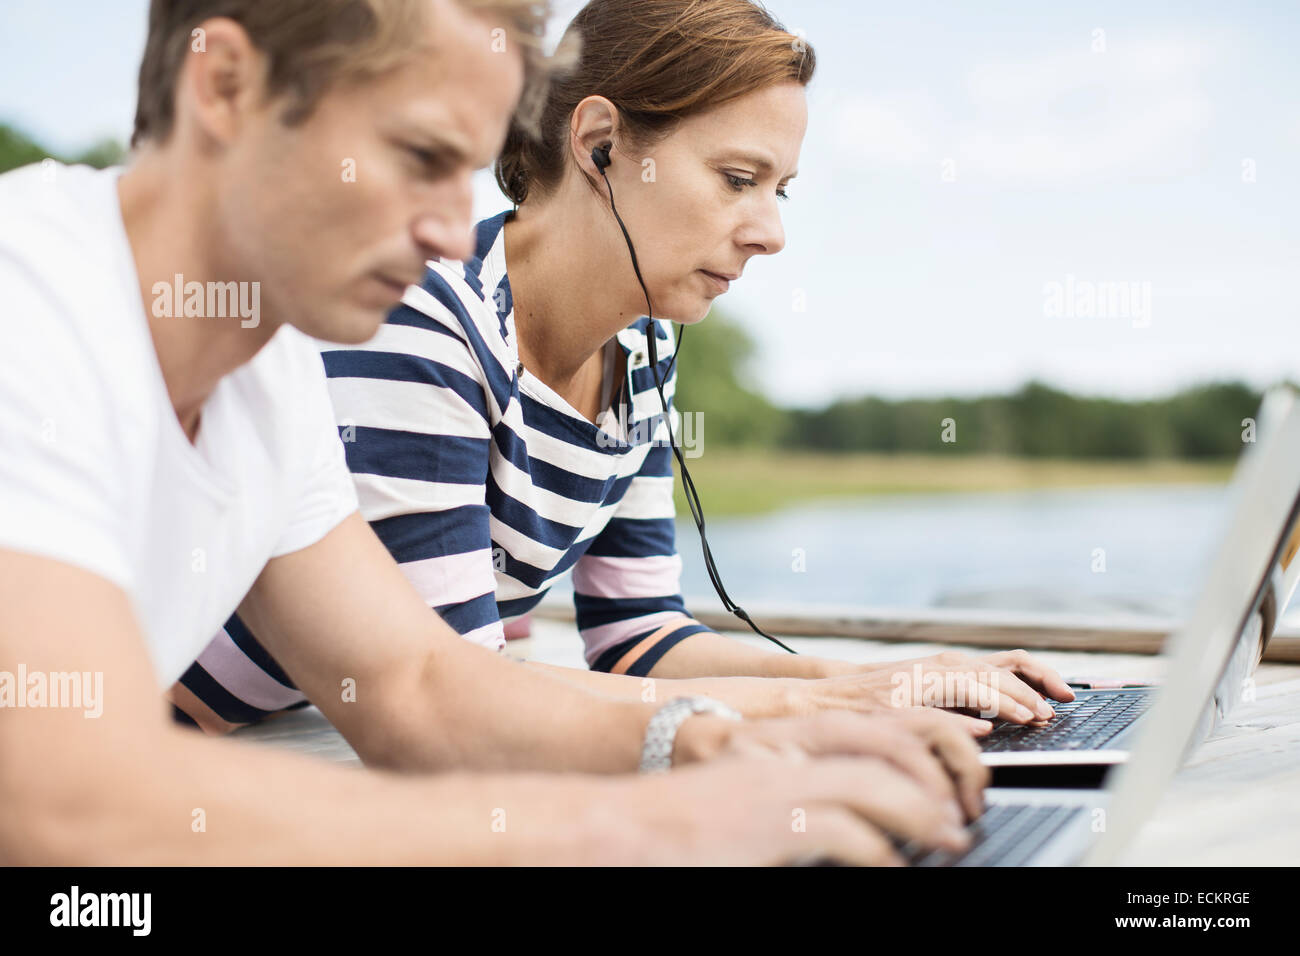 Side view of mature couple using laptops while lying on pier Stock Photo